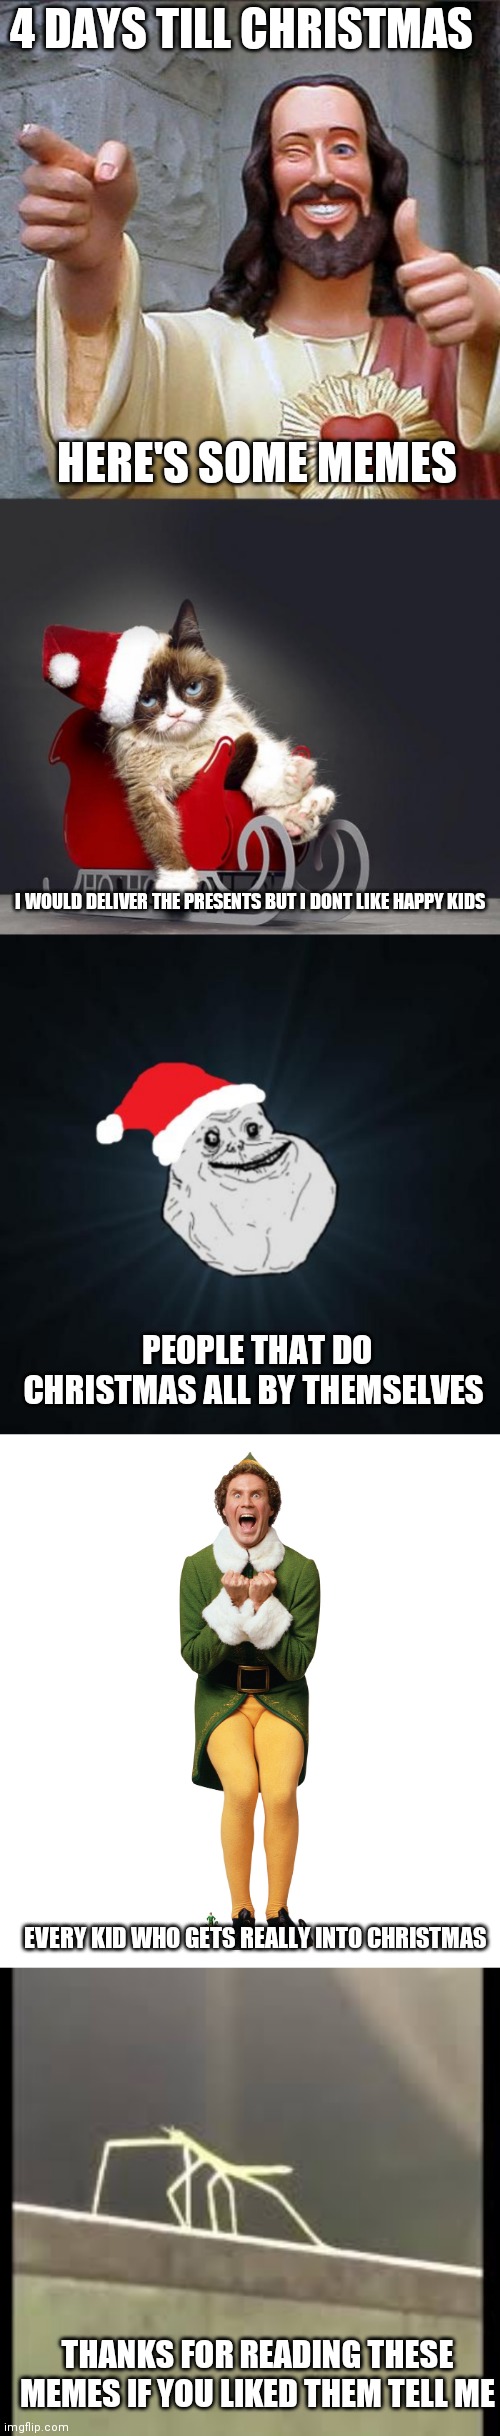 5 memes in 1 four days till Christmas! |  4 DAYS TILL CHRISTMAS; HERE'S SOME MEMES; I WOULD DELIVER THE PRESENTS BUT I DONT LIKE HAPPY KIDS; PEOPLE THAT DO CHRISTMAS ALL BY THEMSELVES; EVERY KID WHO GETS REALLY INTO CHRISTMAS; THANKS FOR READING THESE MEMES IF YOU LIKED THEM TELL ME | image tagged in memes,buddy christ,grumpy cat christmas hd,forever alone christmas,christmas elf,stickbug | made w/ Imgflip meme maker